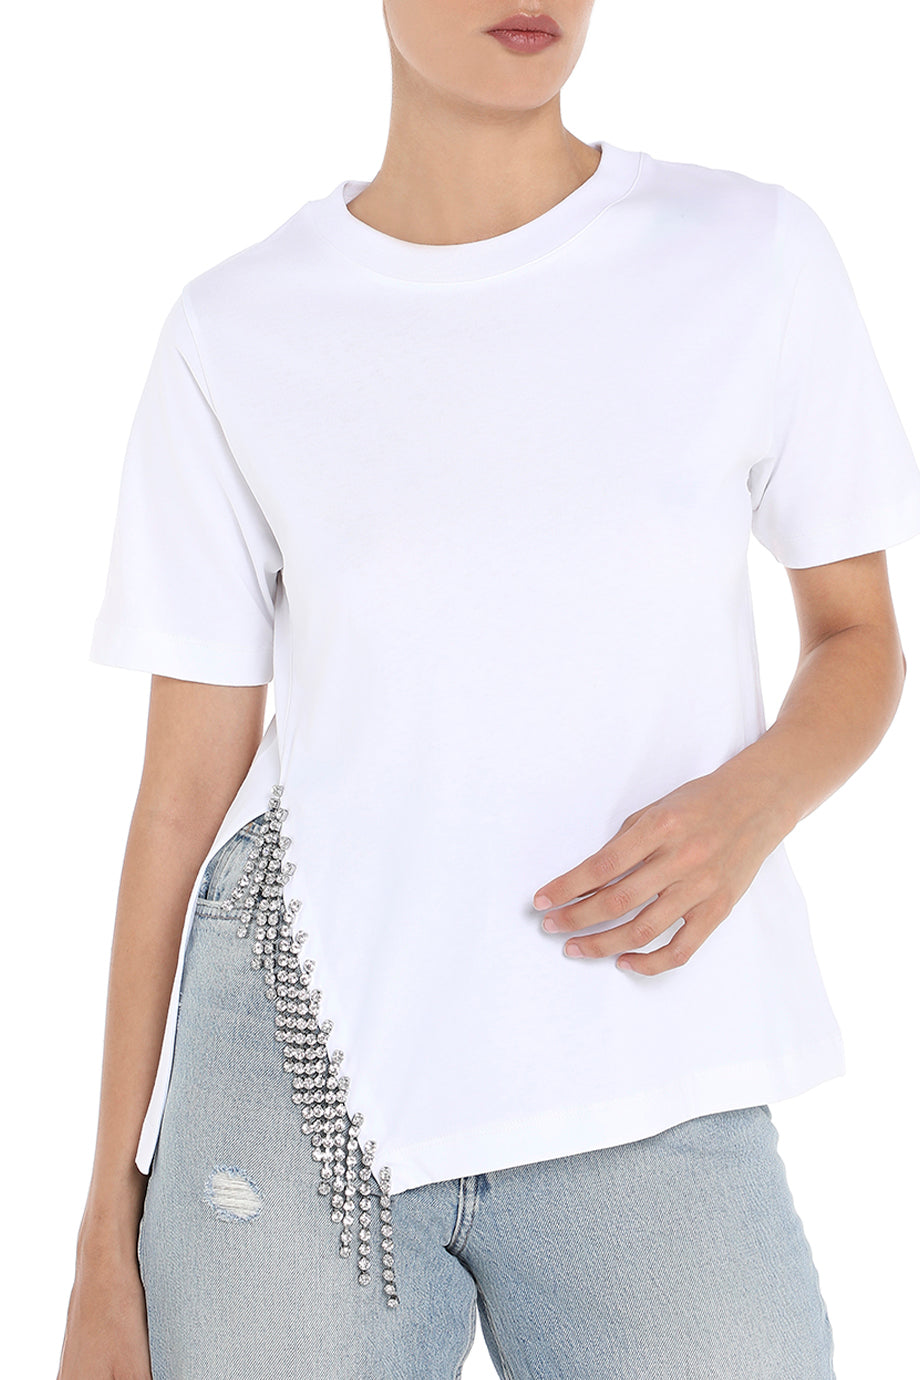 Christopher Kane Crystal Cupchain T-Shirt in White. Detail view.